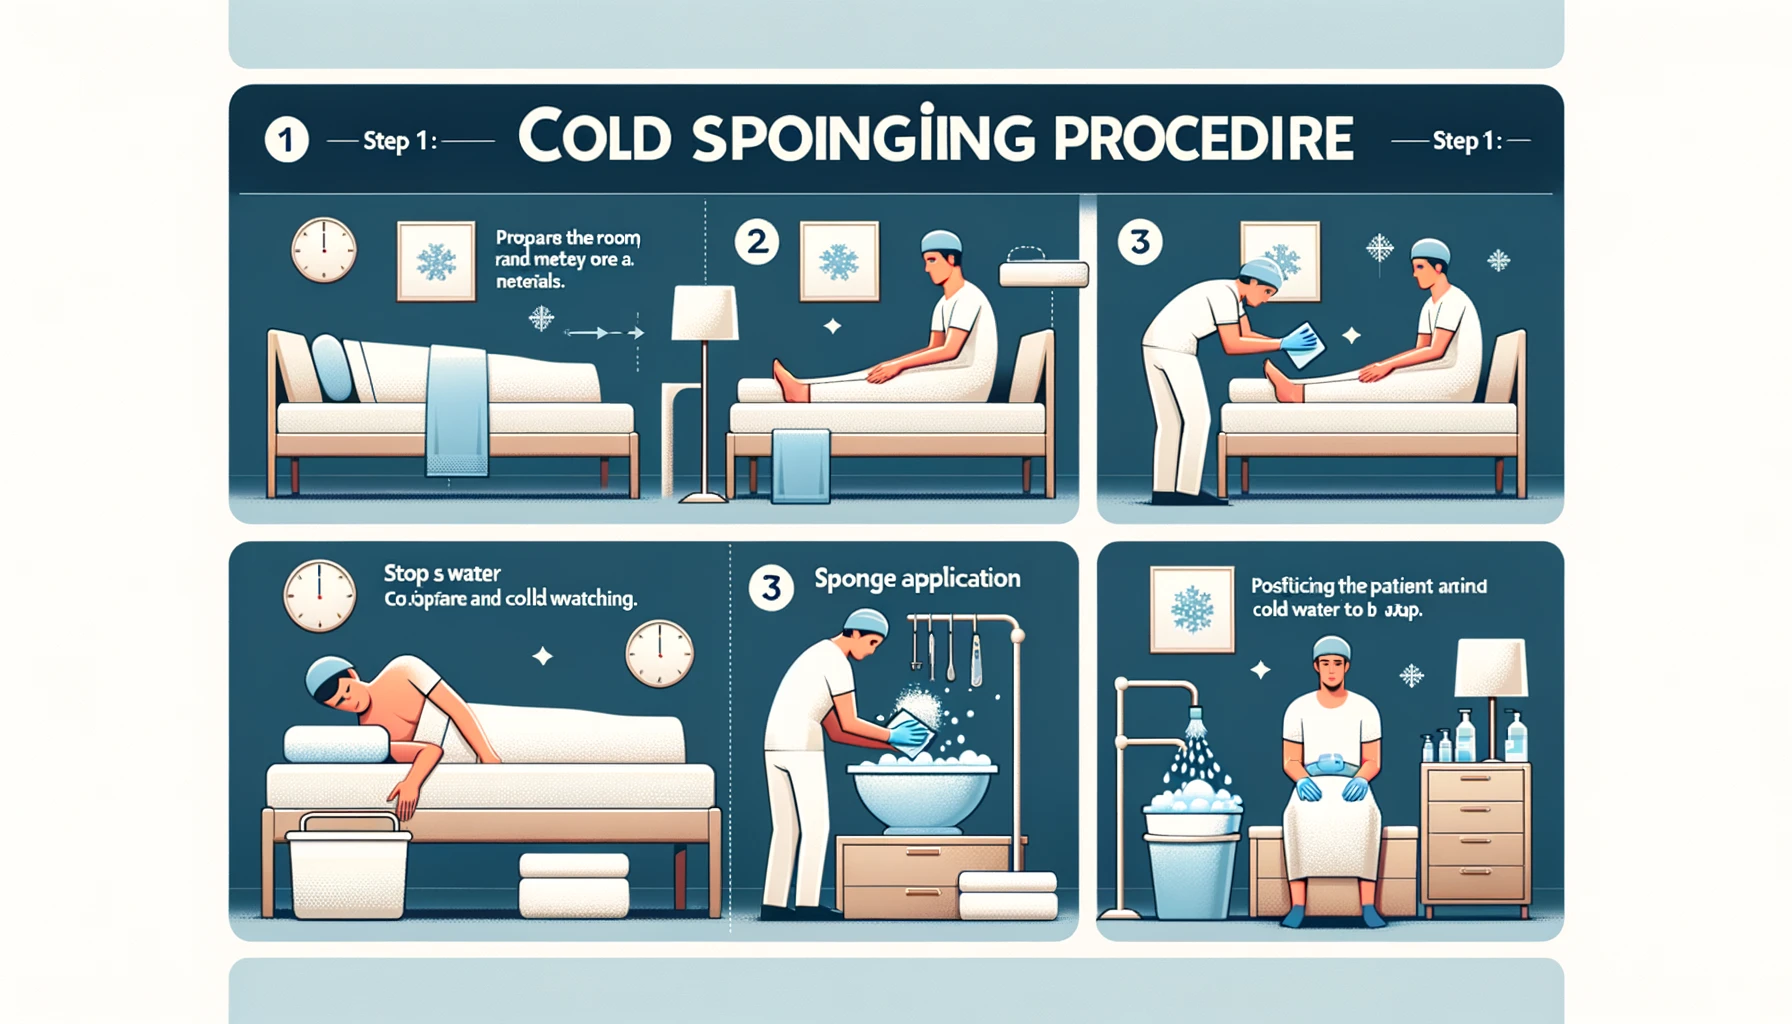 Cold sponging, also known as tepid sponging, is a procedure typically used to reduce fever or body temperature. It involves the use of a sponge or cloth soaked in water (usually lukewarm, not cold) to gently sponge the body.